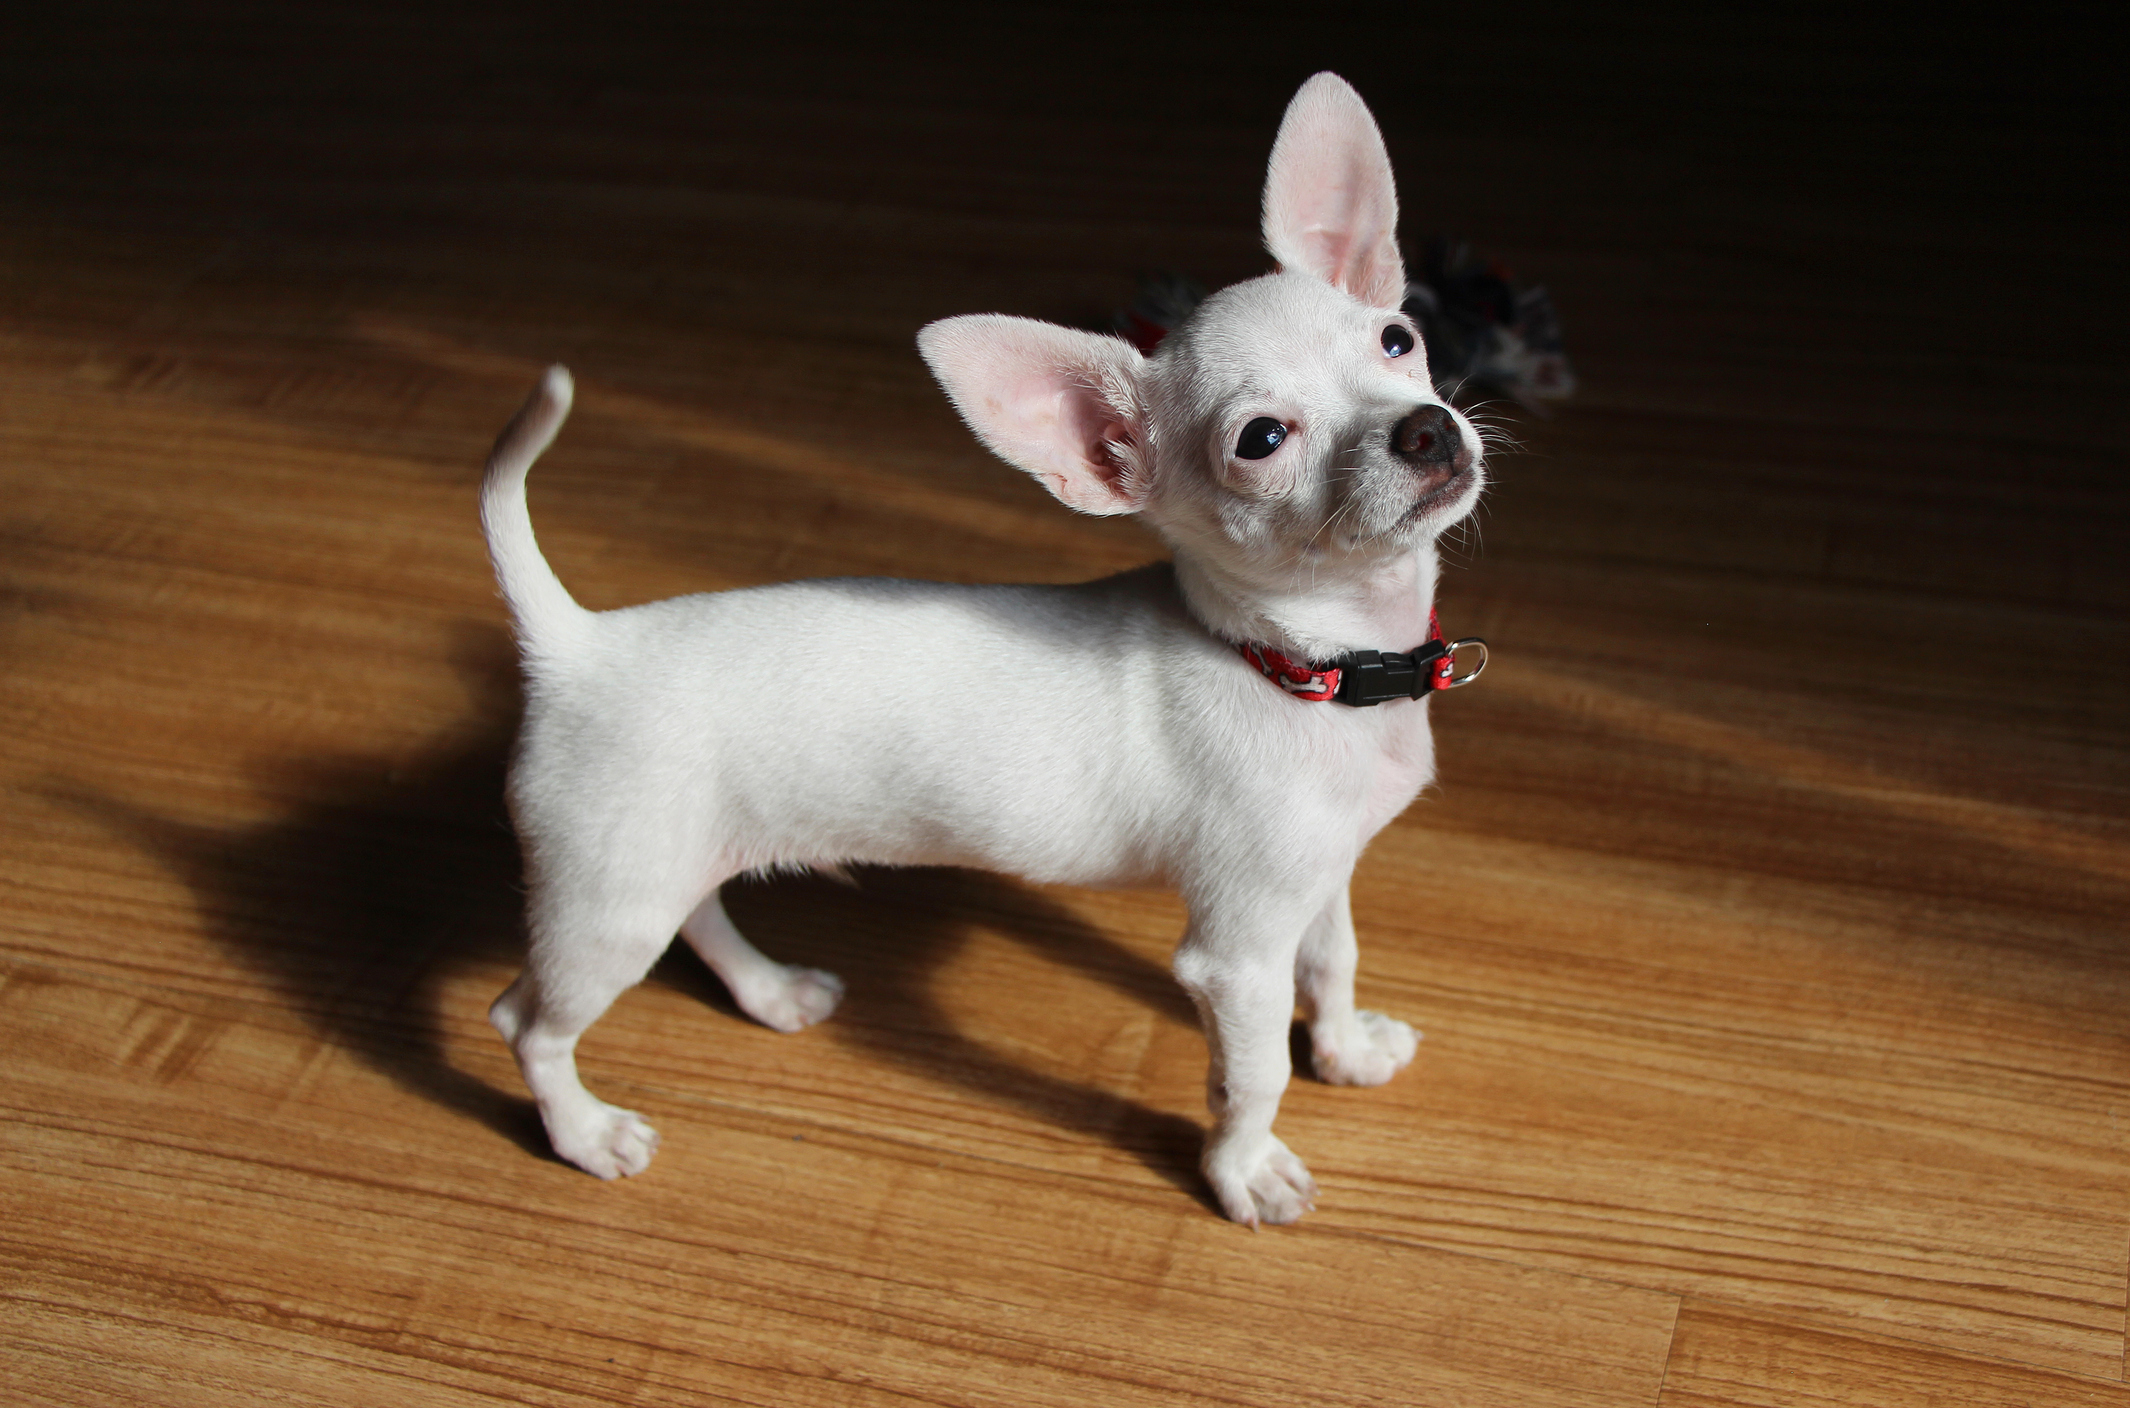 Teacup Dog: The Smallest Dog Breeds | Healthy Paws Pet Insurance